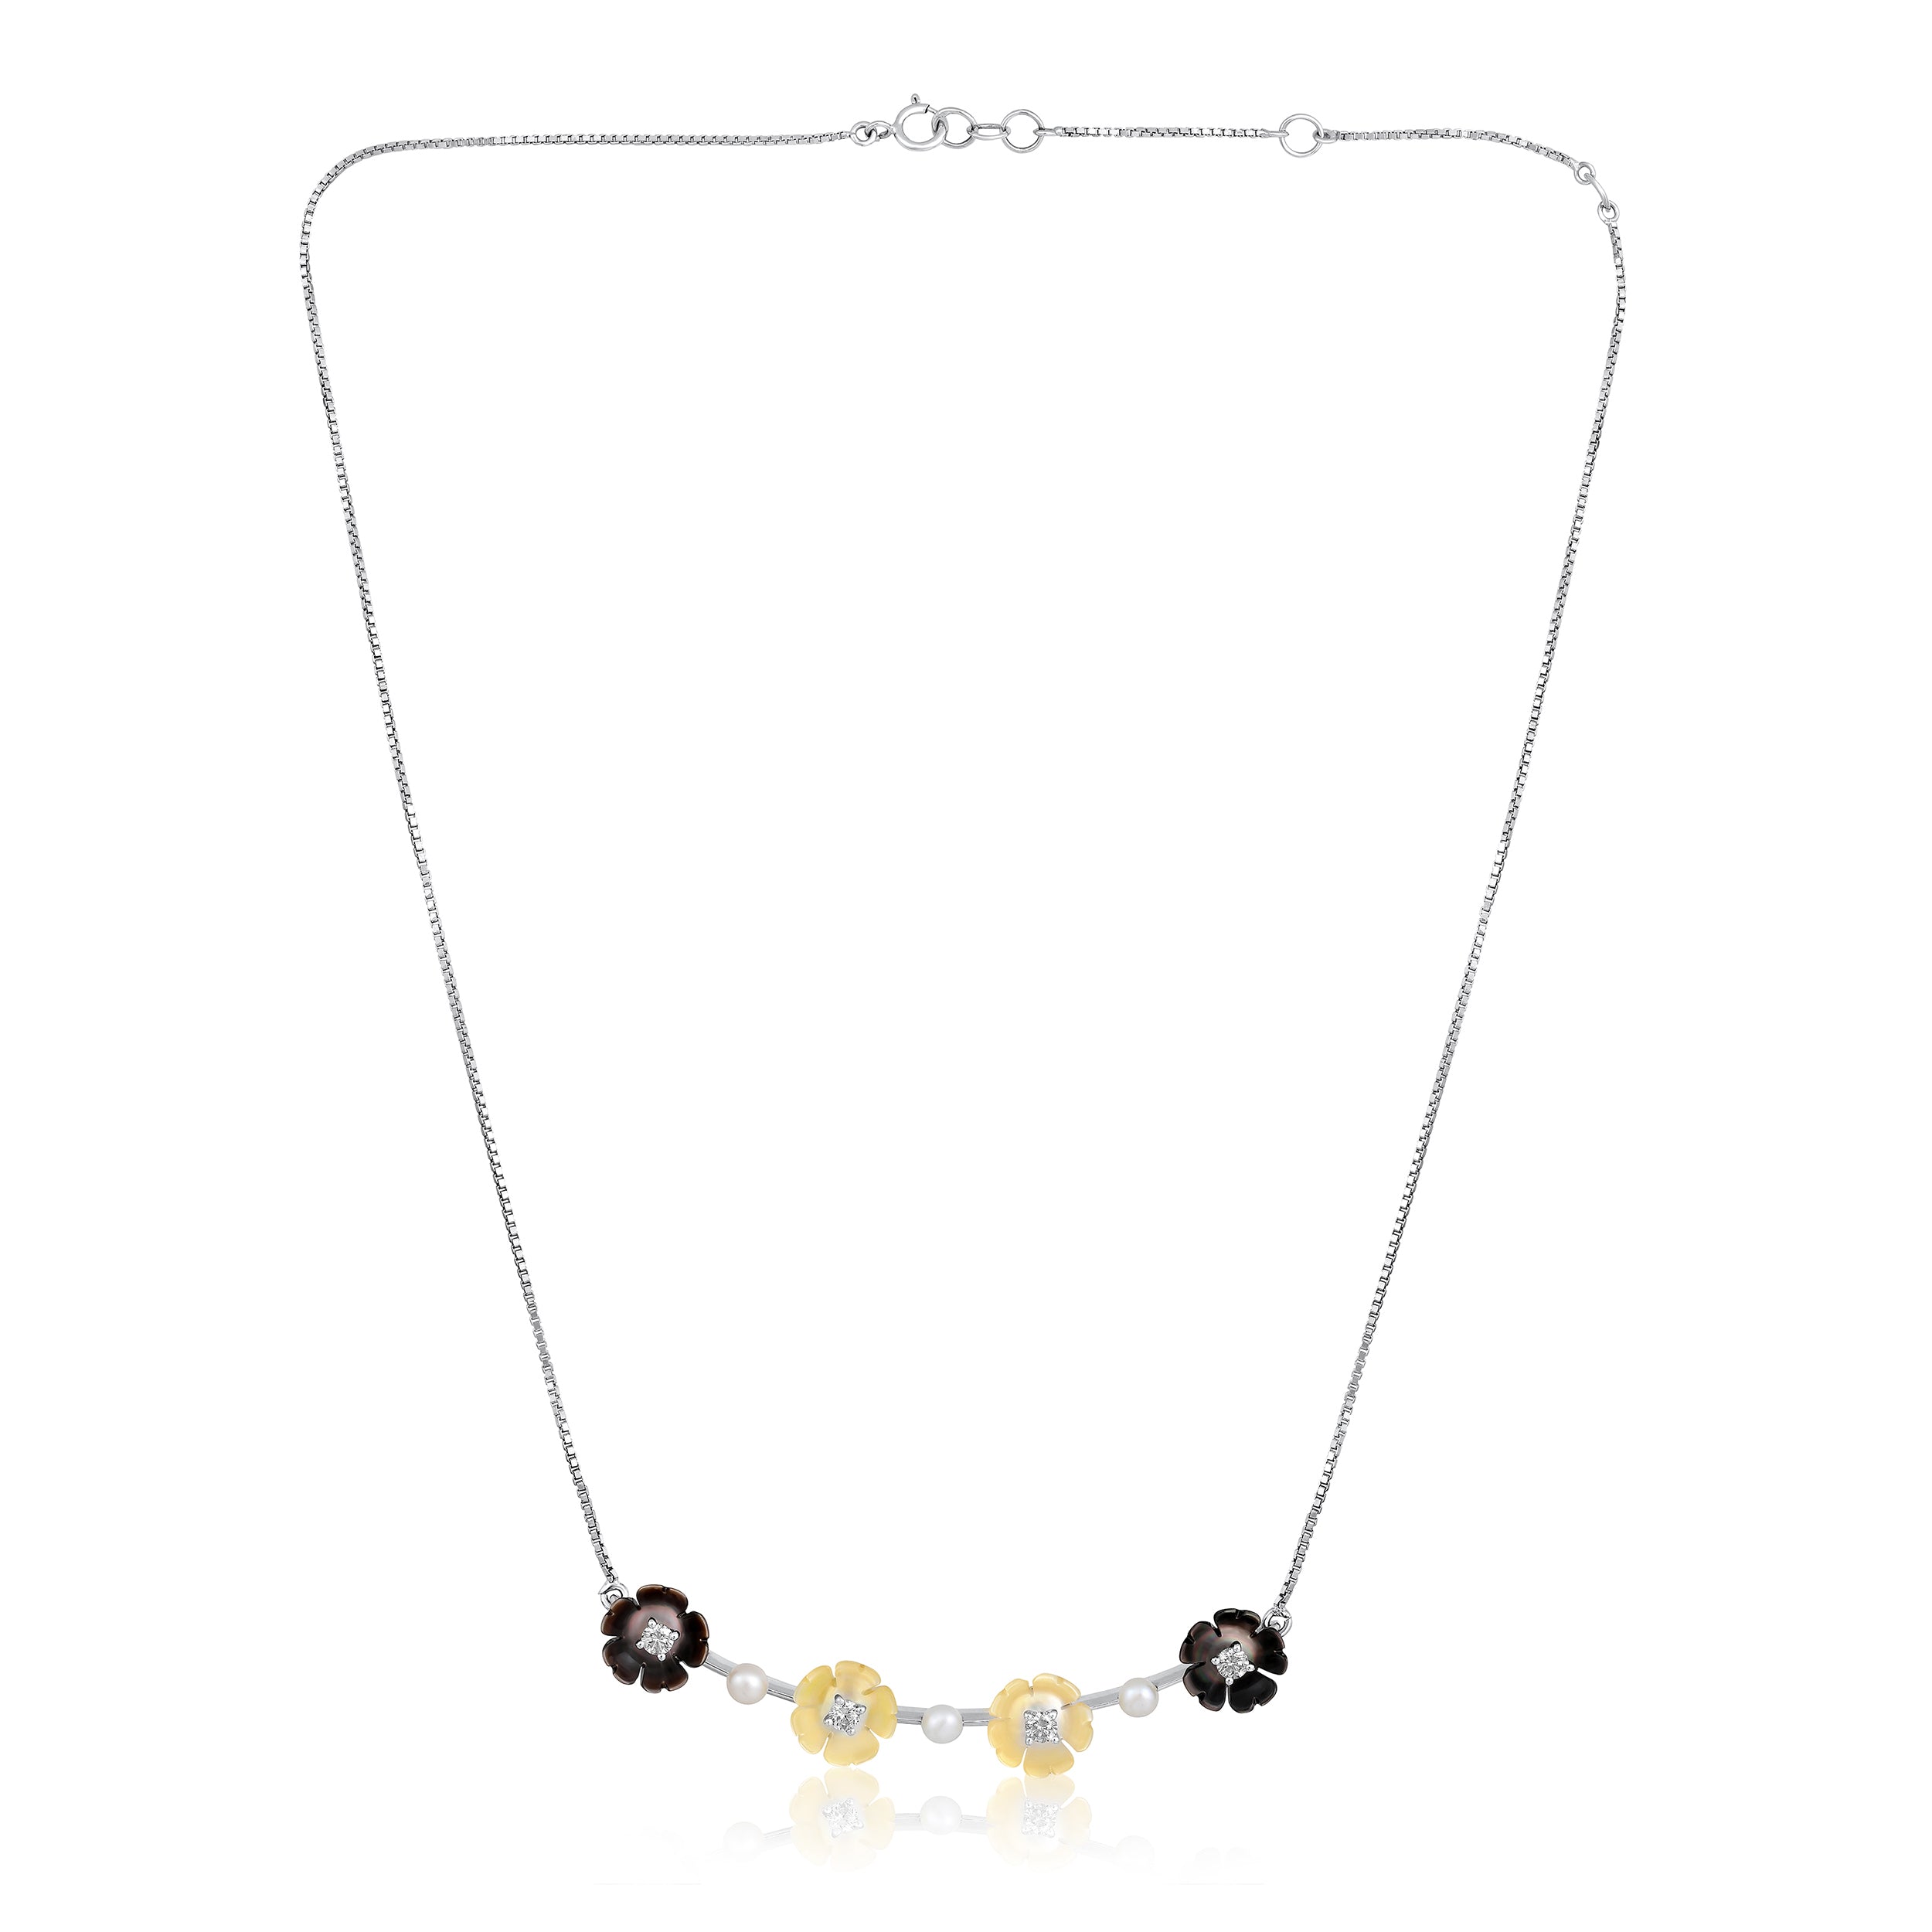 Certified 14K Gold 3.9ct Natural Diamond w/ Pearls Black Flower White Necklace